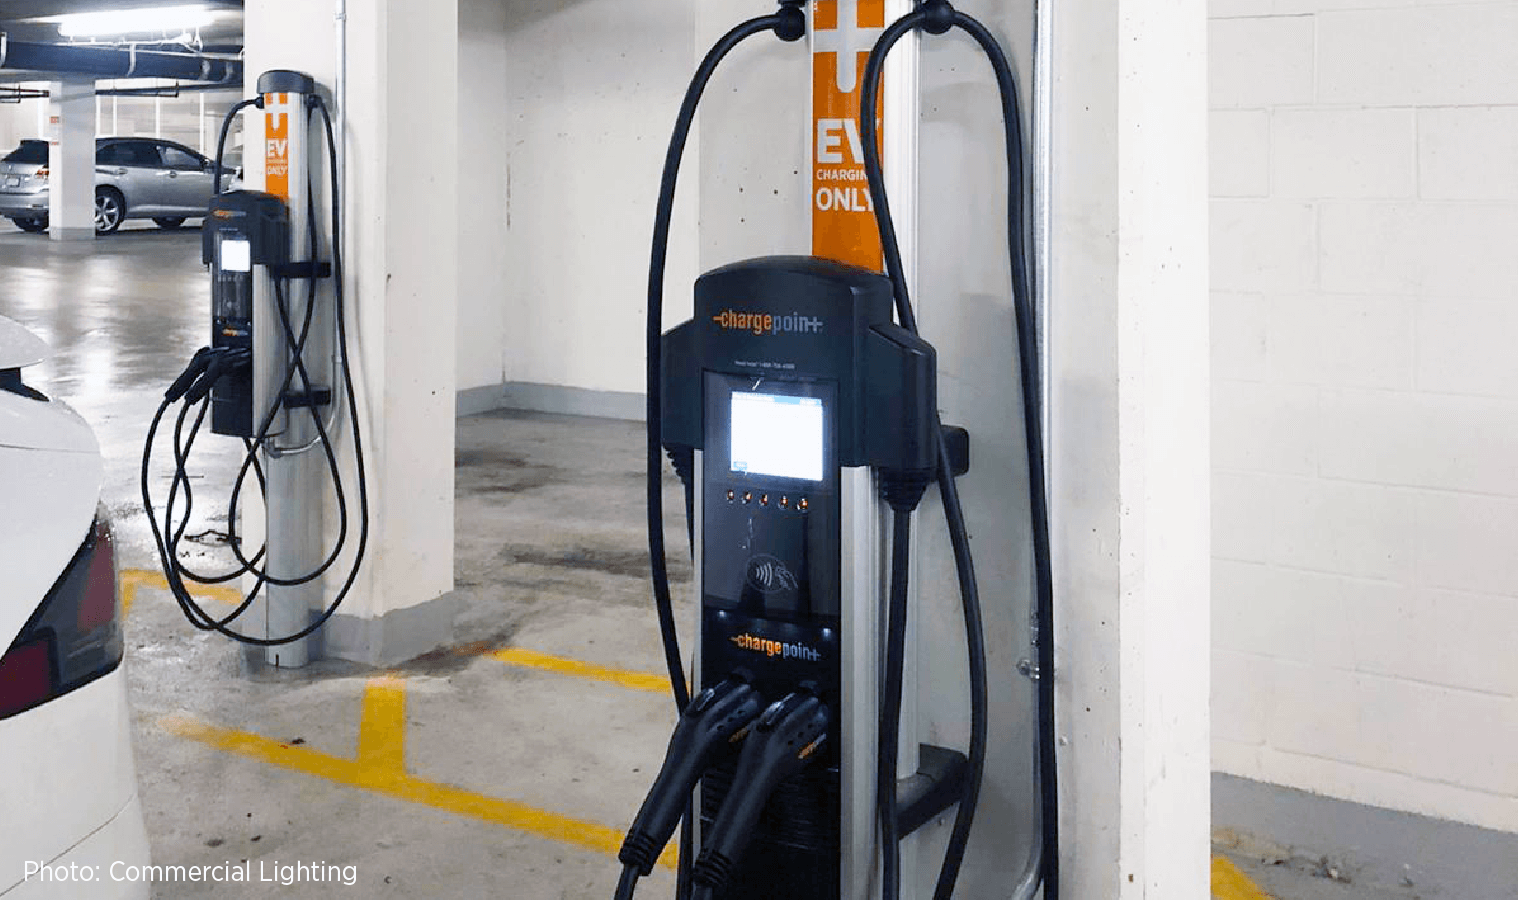 Two ChargePoint chargers in a garage